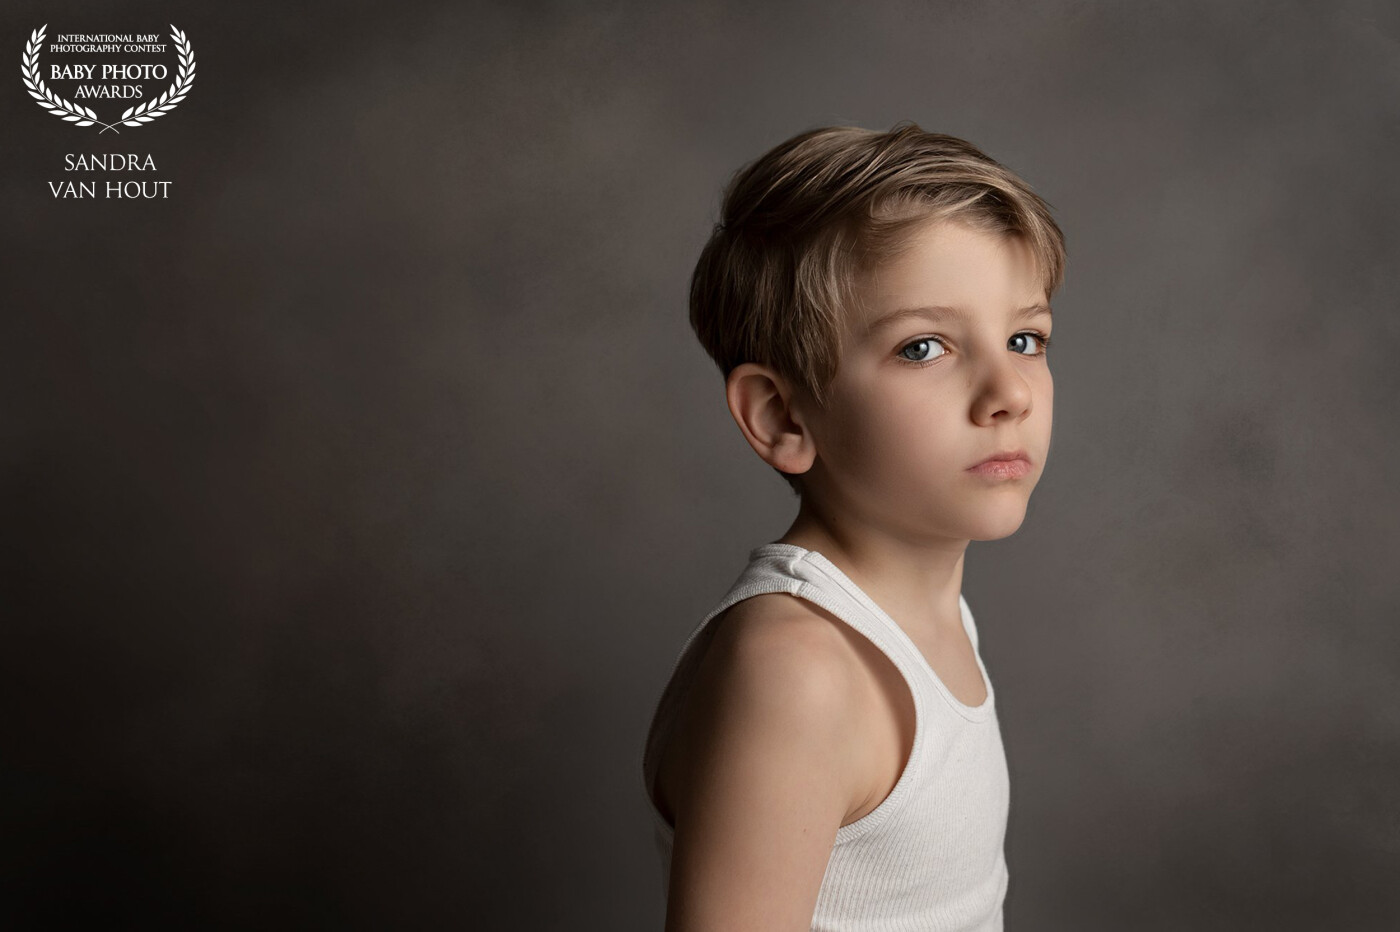 This is my youngest son! I am practice for fine-art portrait photography and I think I did a great job. This portrait means so much to me and I hope i will give my clients the same feeling when i photograph there children this way.